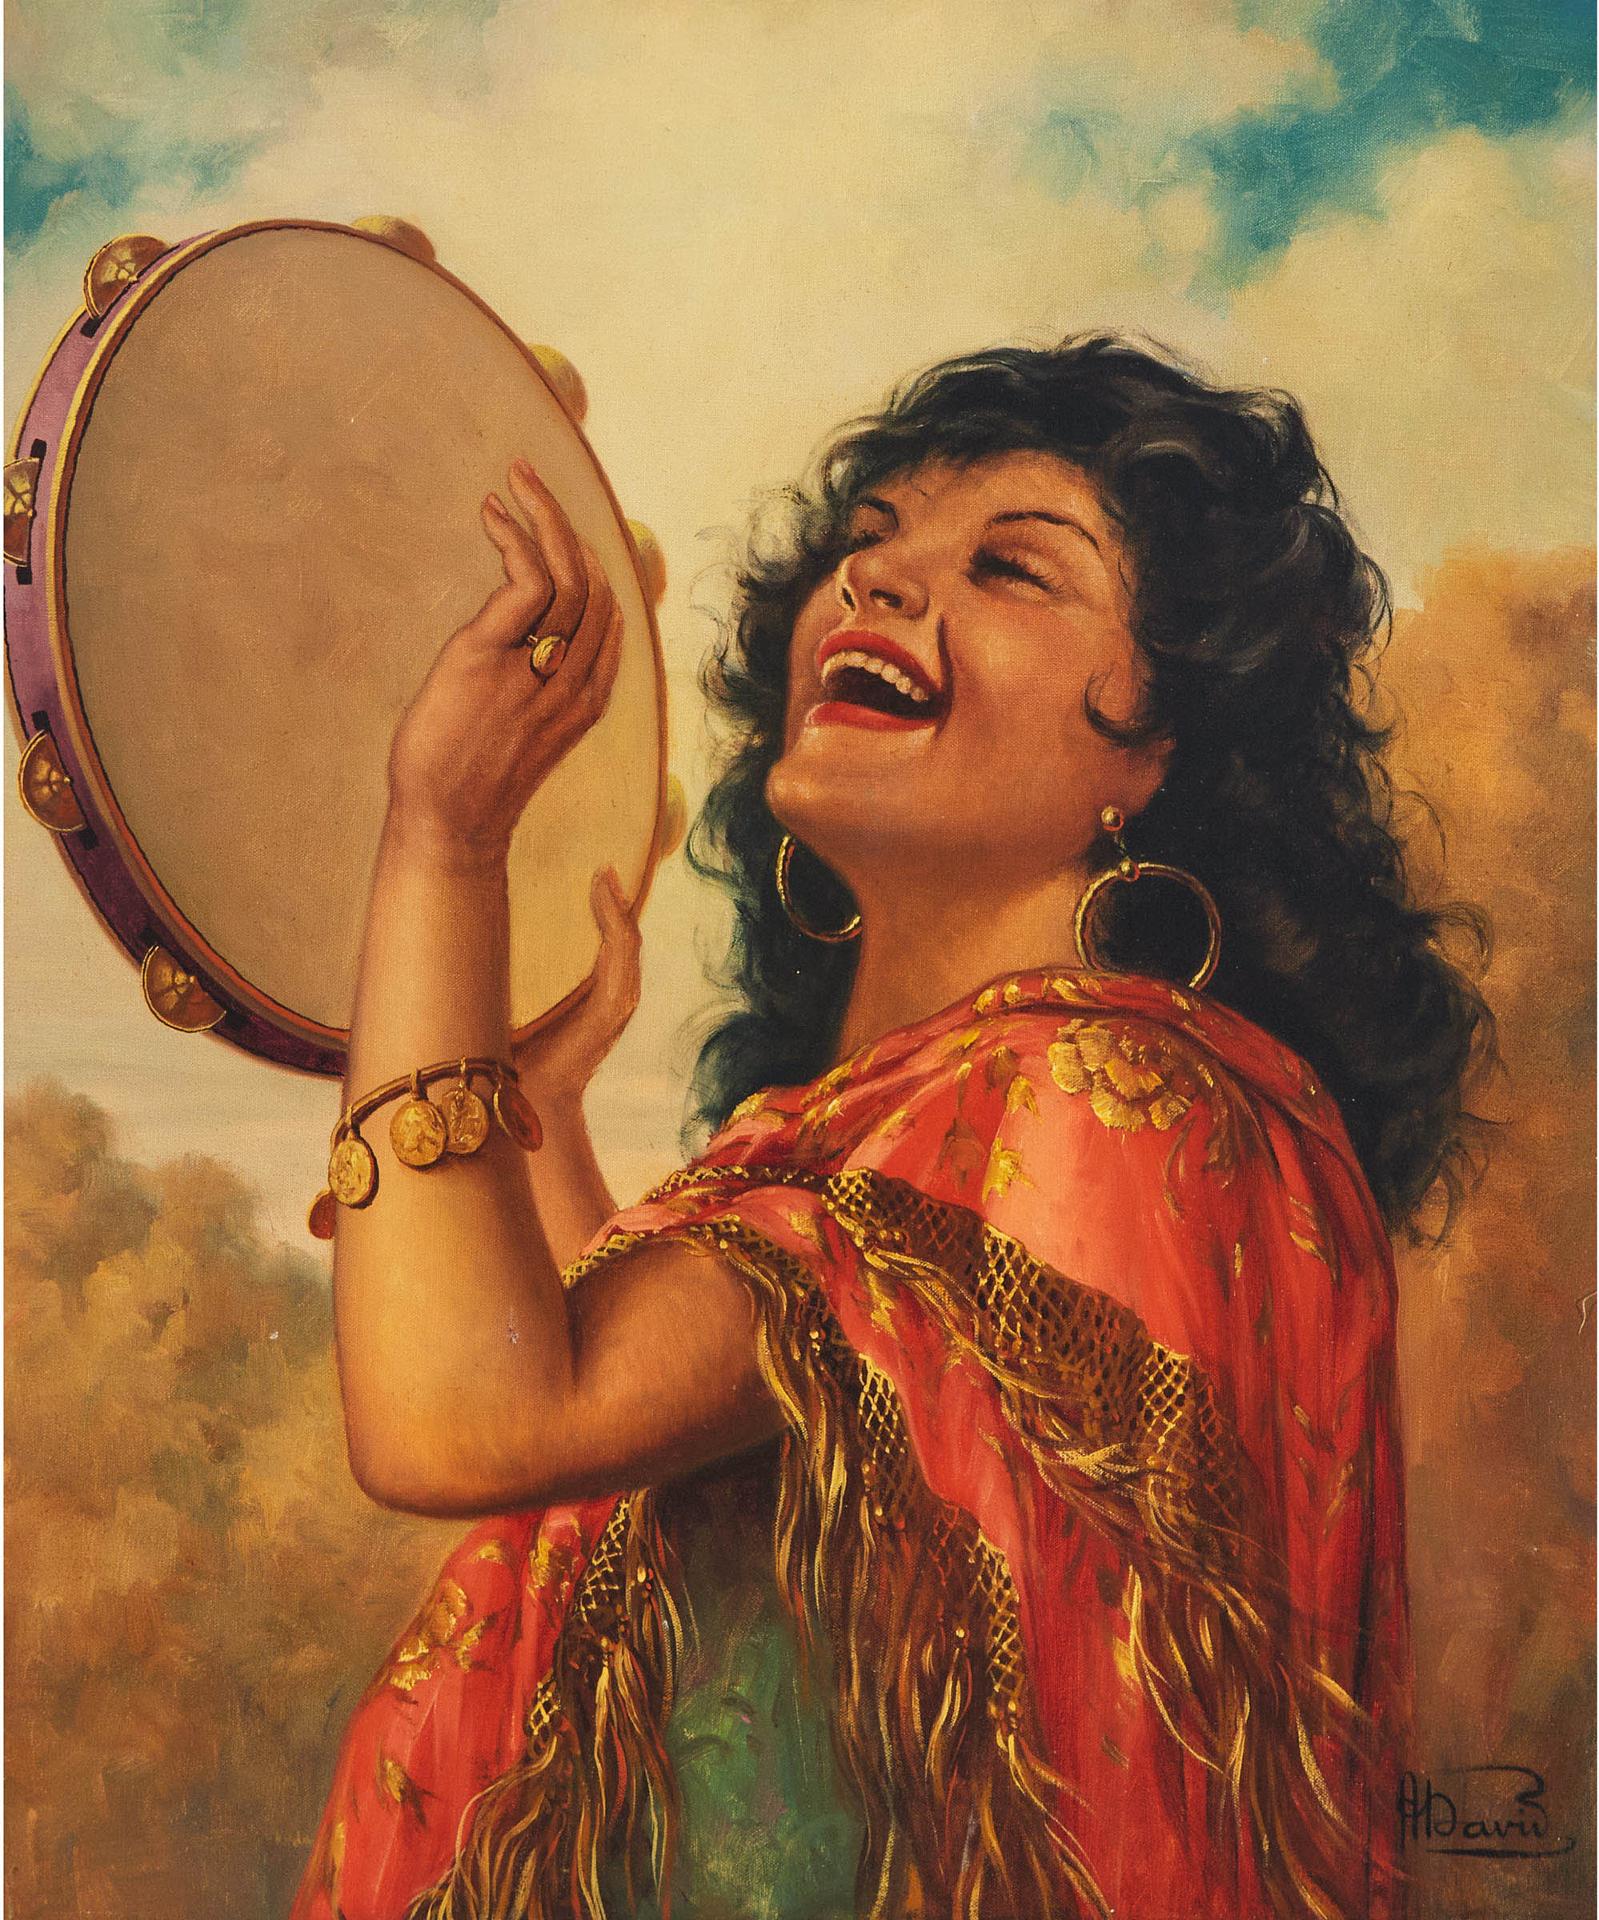 André David - Gypsy Girl Holding Tambourine In Her Hand